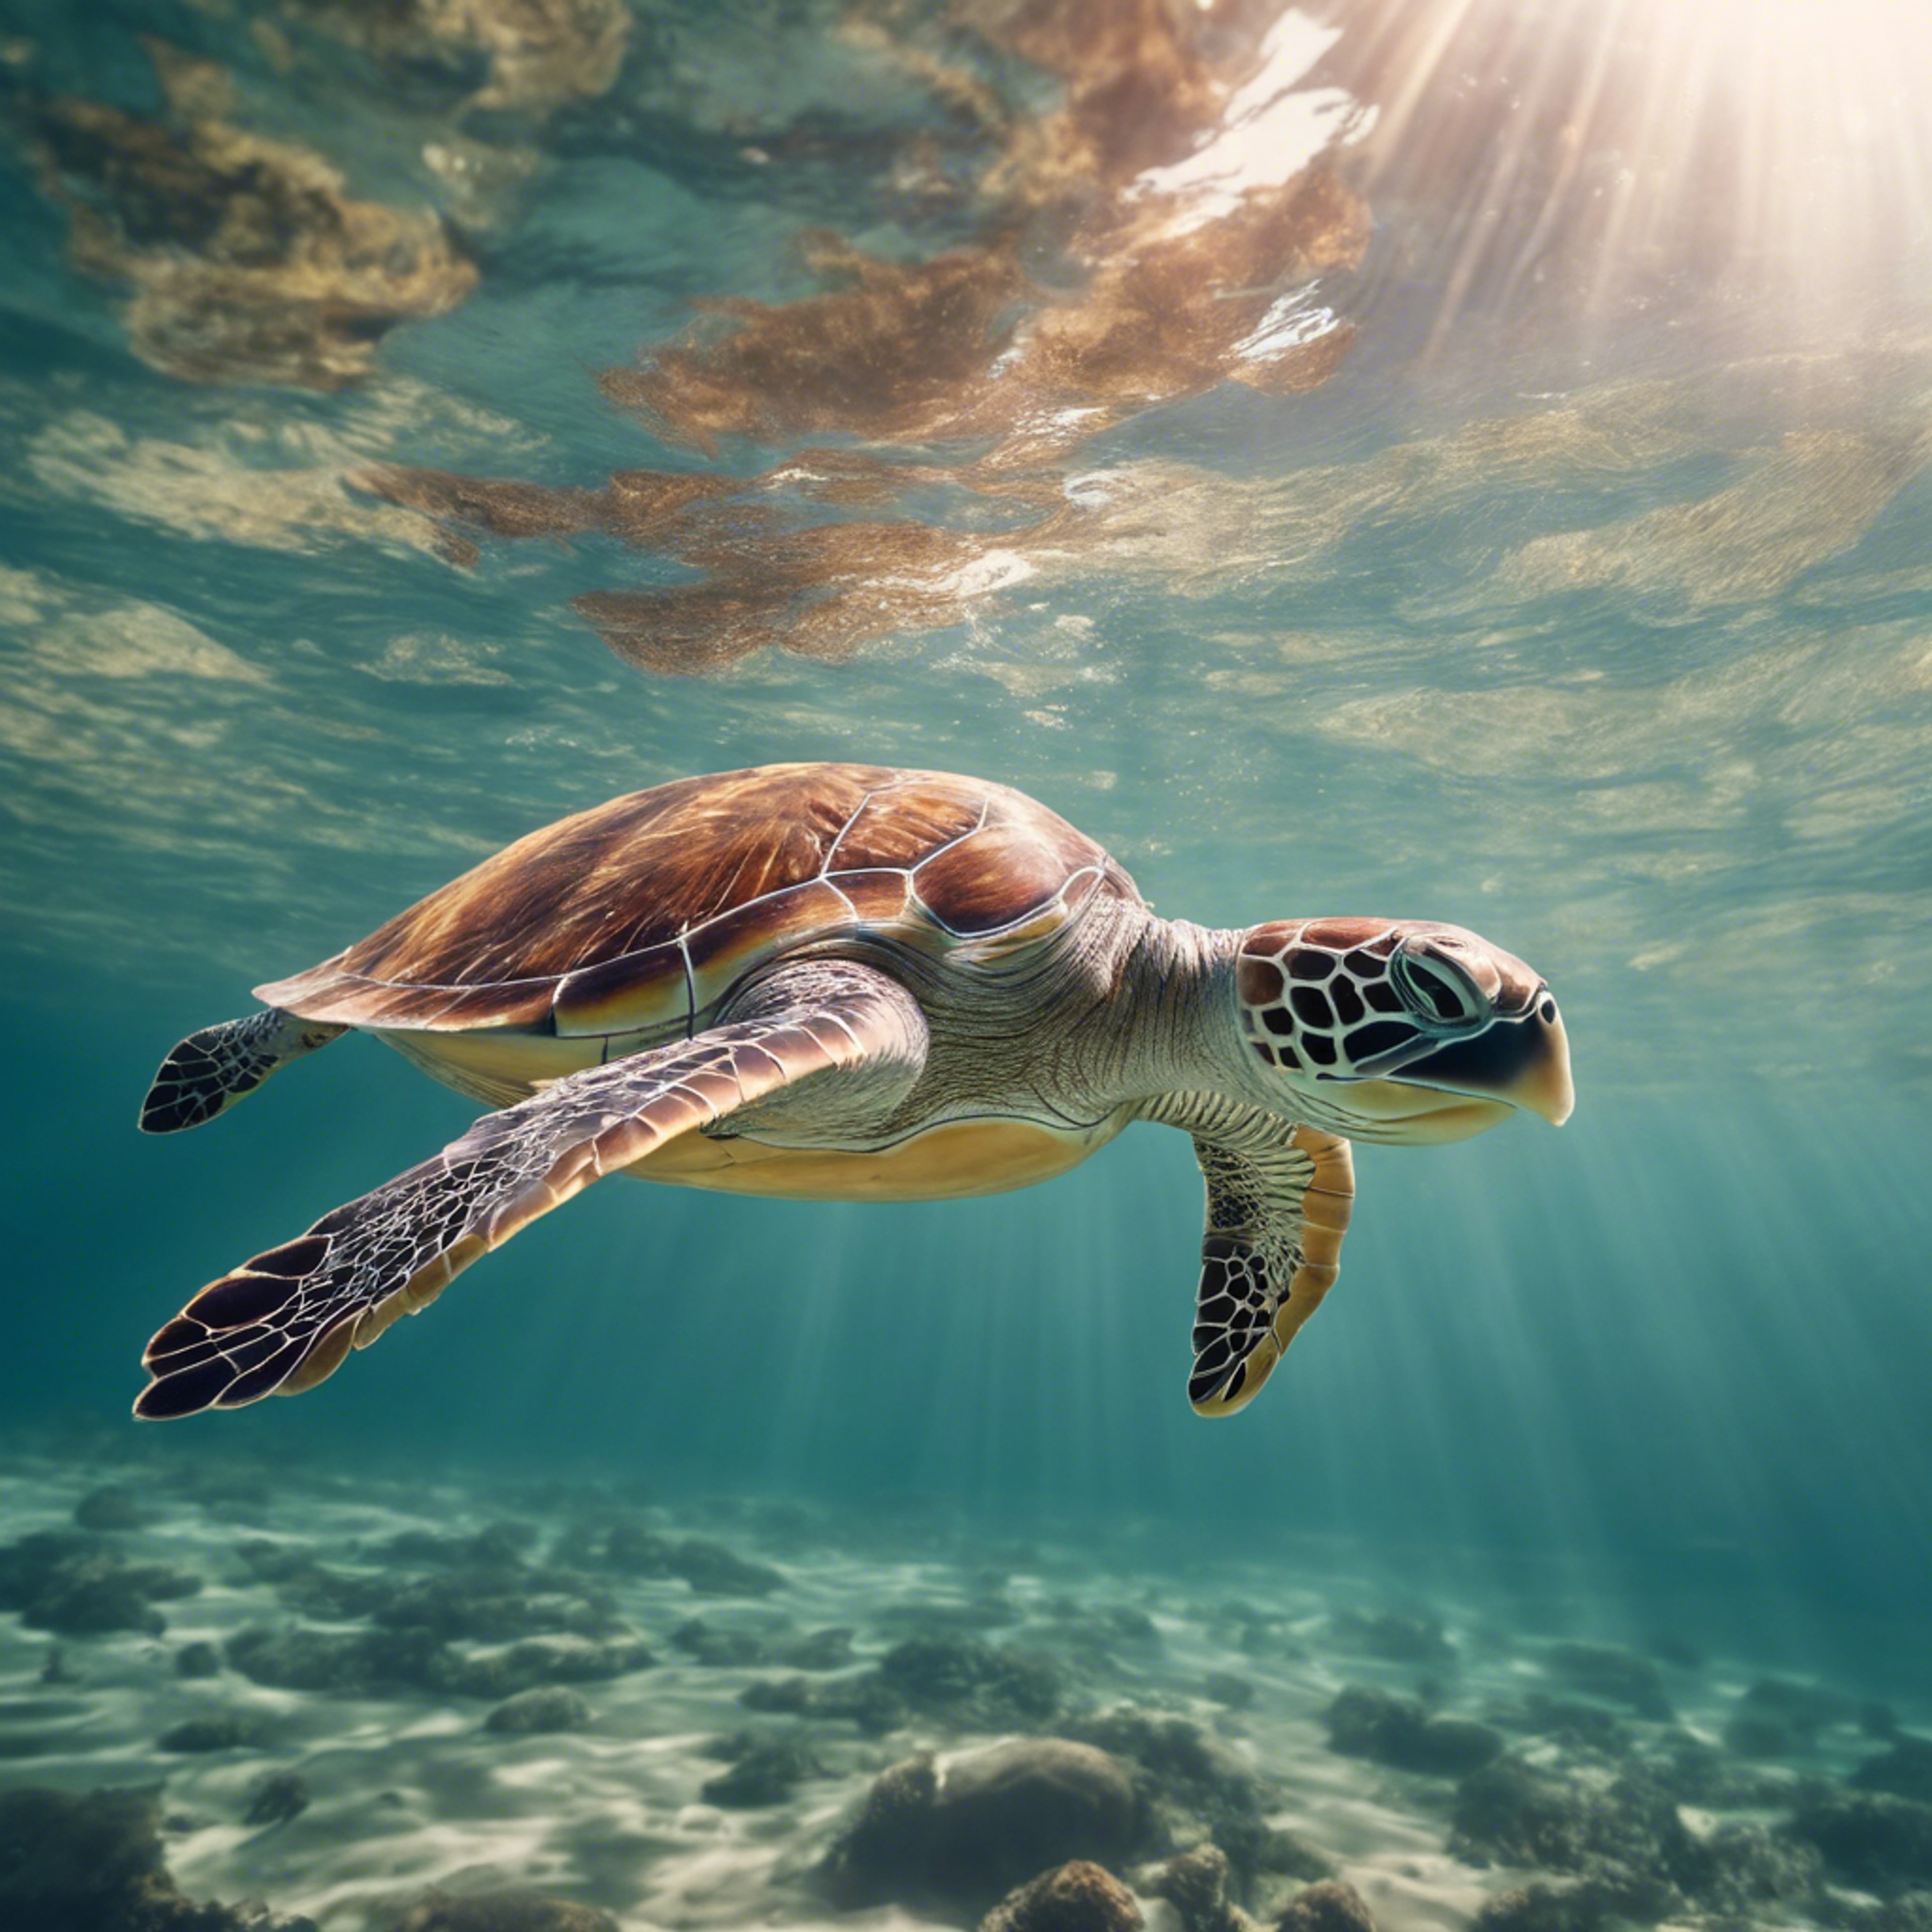 Sea turtle swimming leisurely in the ocean, with the sun penetrating the surface of the water above. Tapeta na zeď[52b0564e310d4ce7b781]